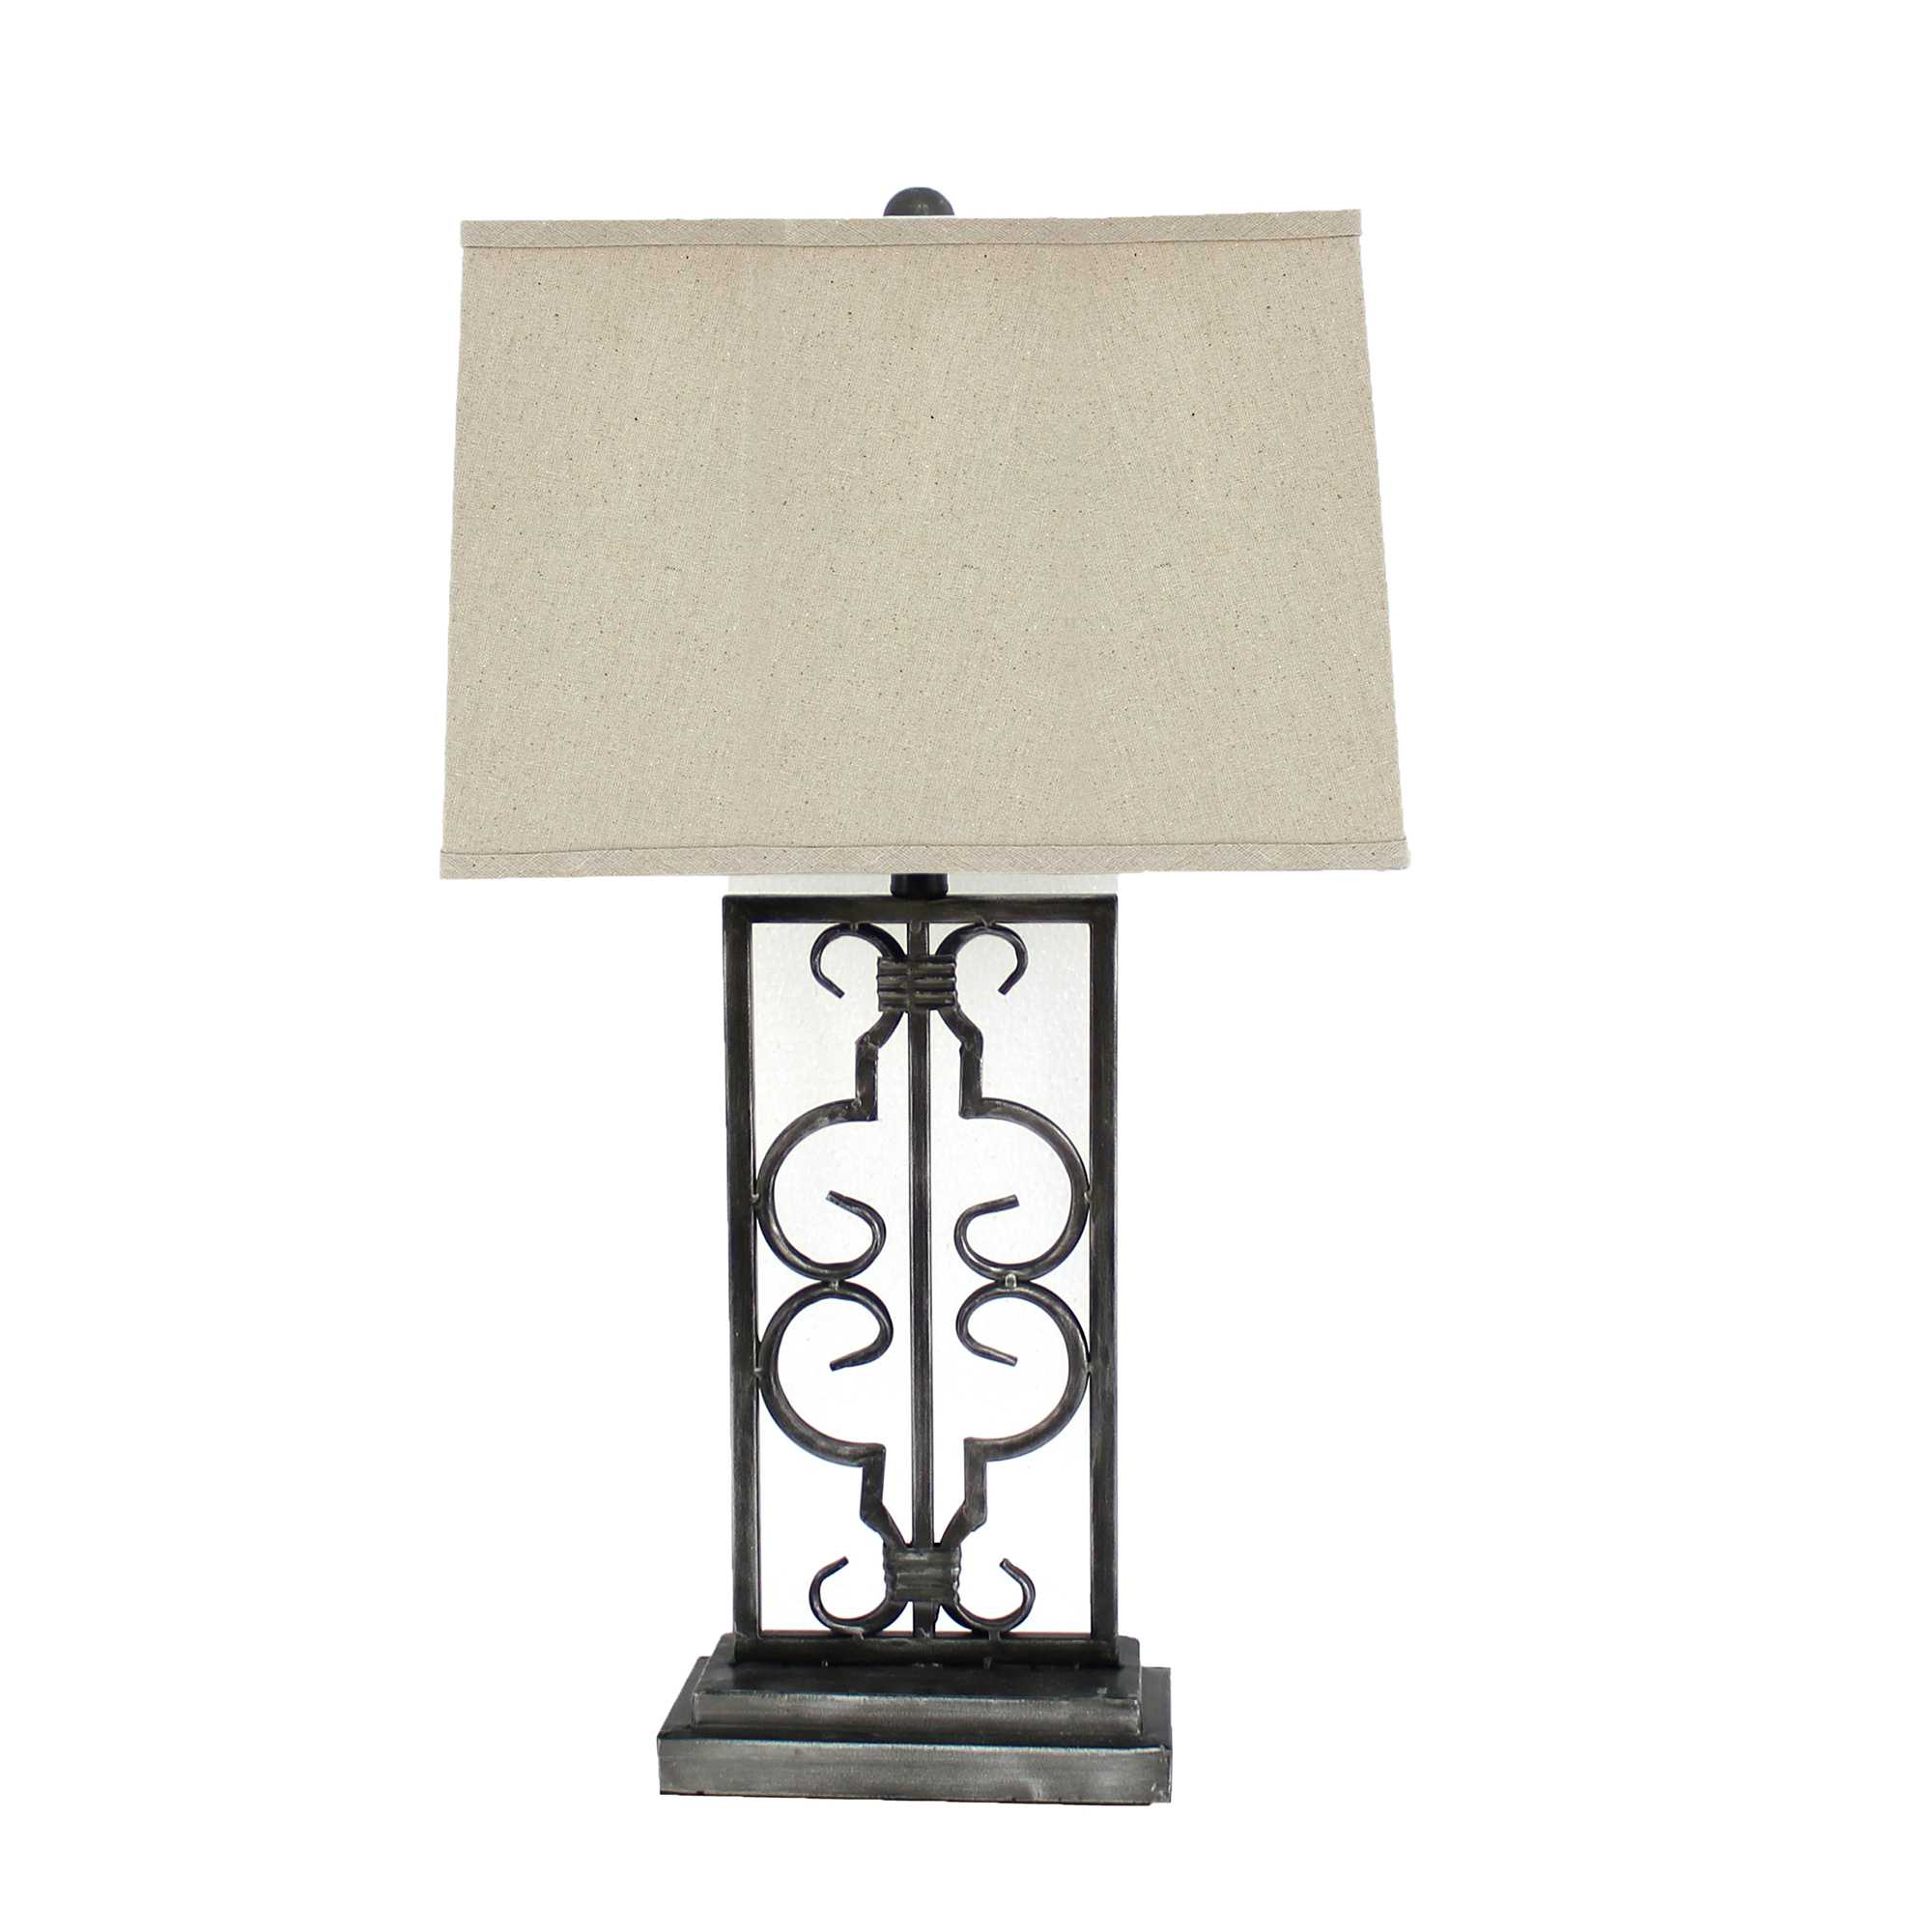 5.5" x 9.25" x 28.75" Gray, Industrial With Stacked Metal Pedestal - Table Lamp